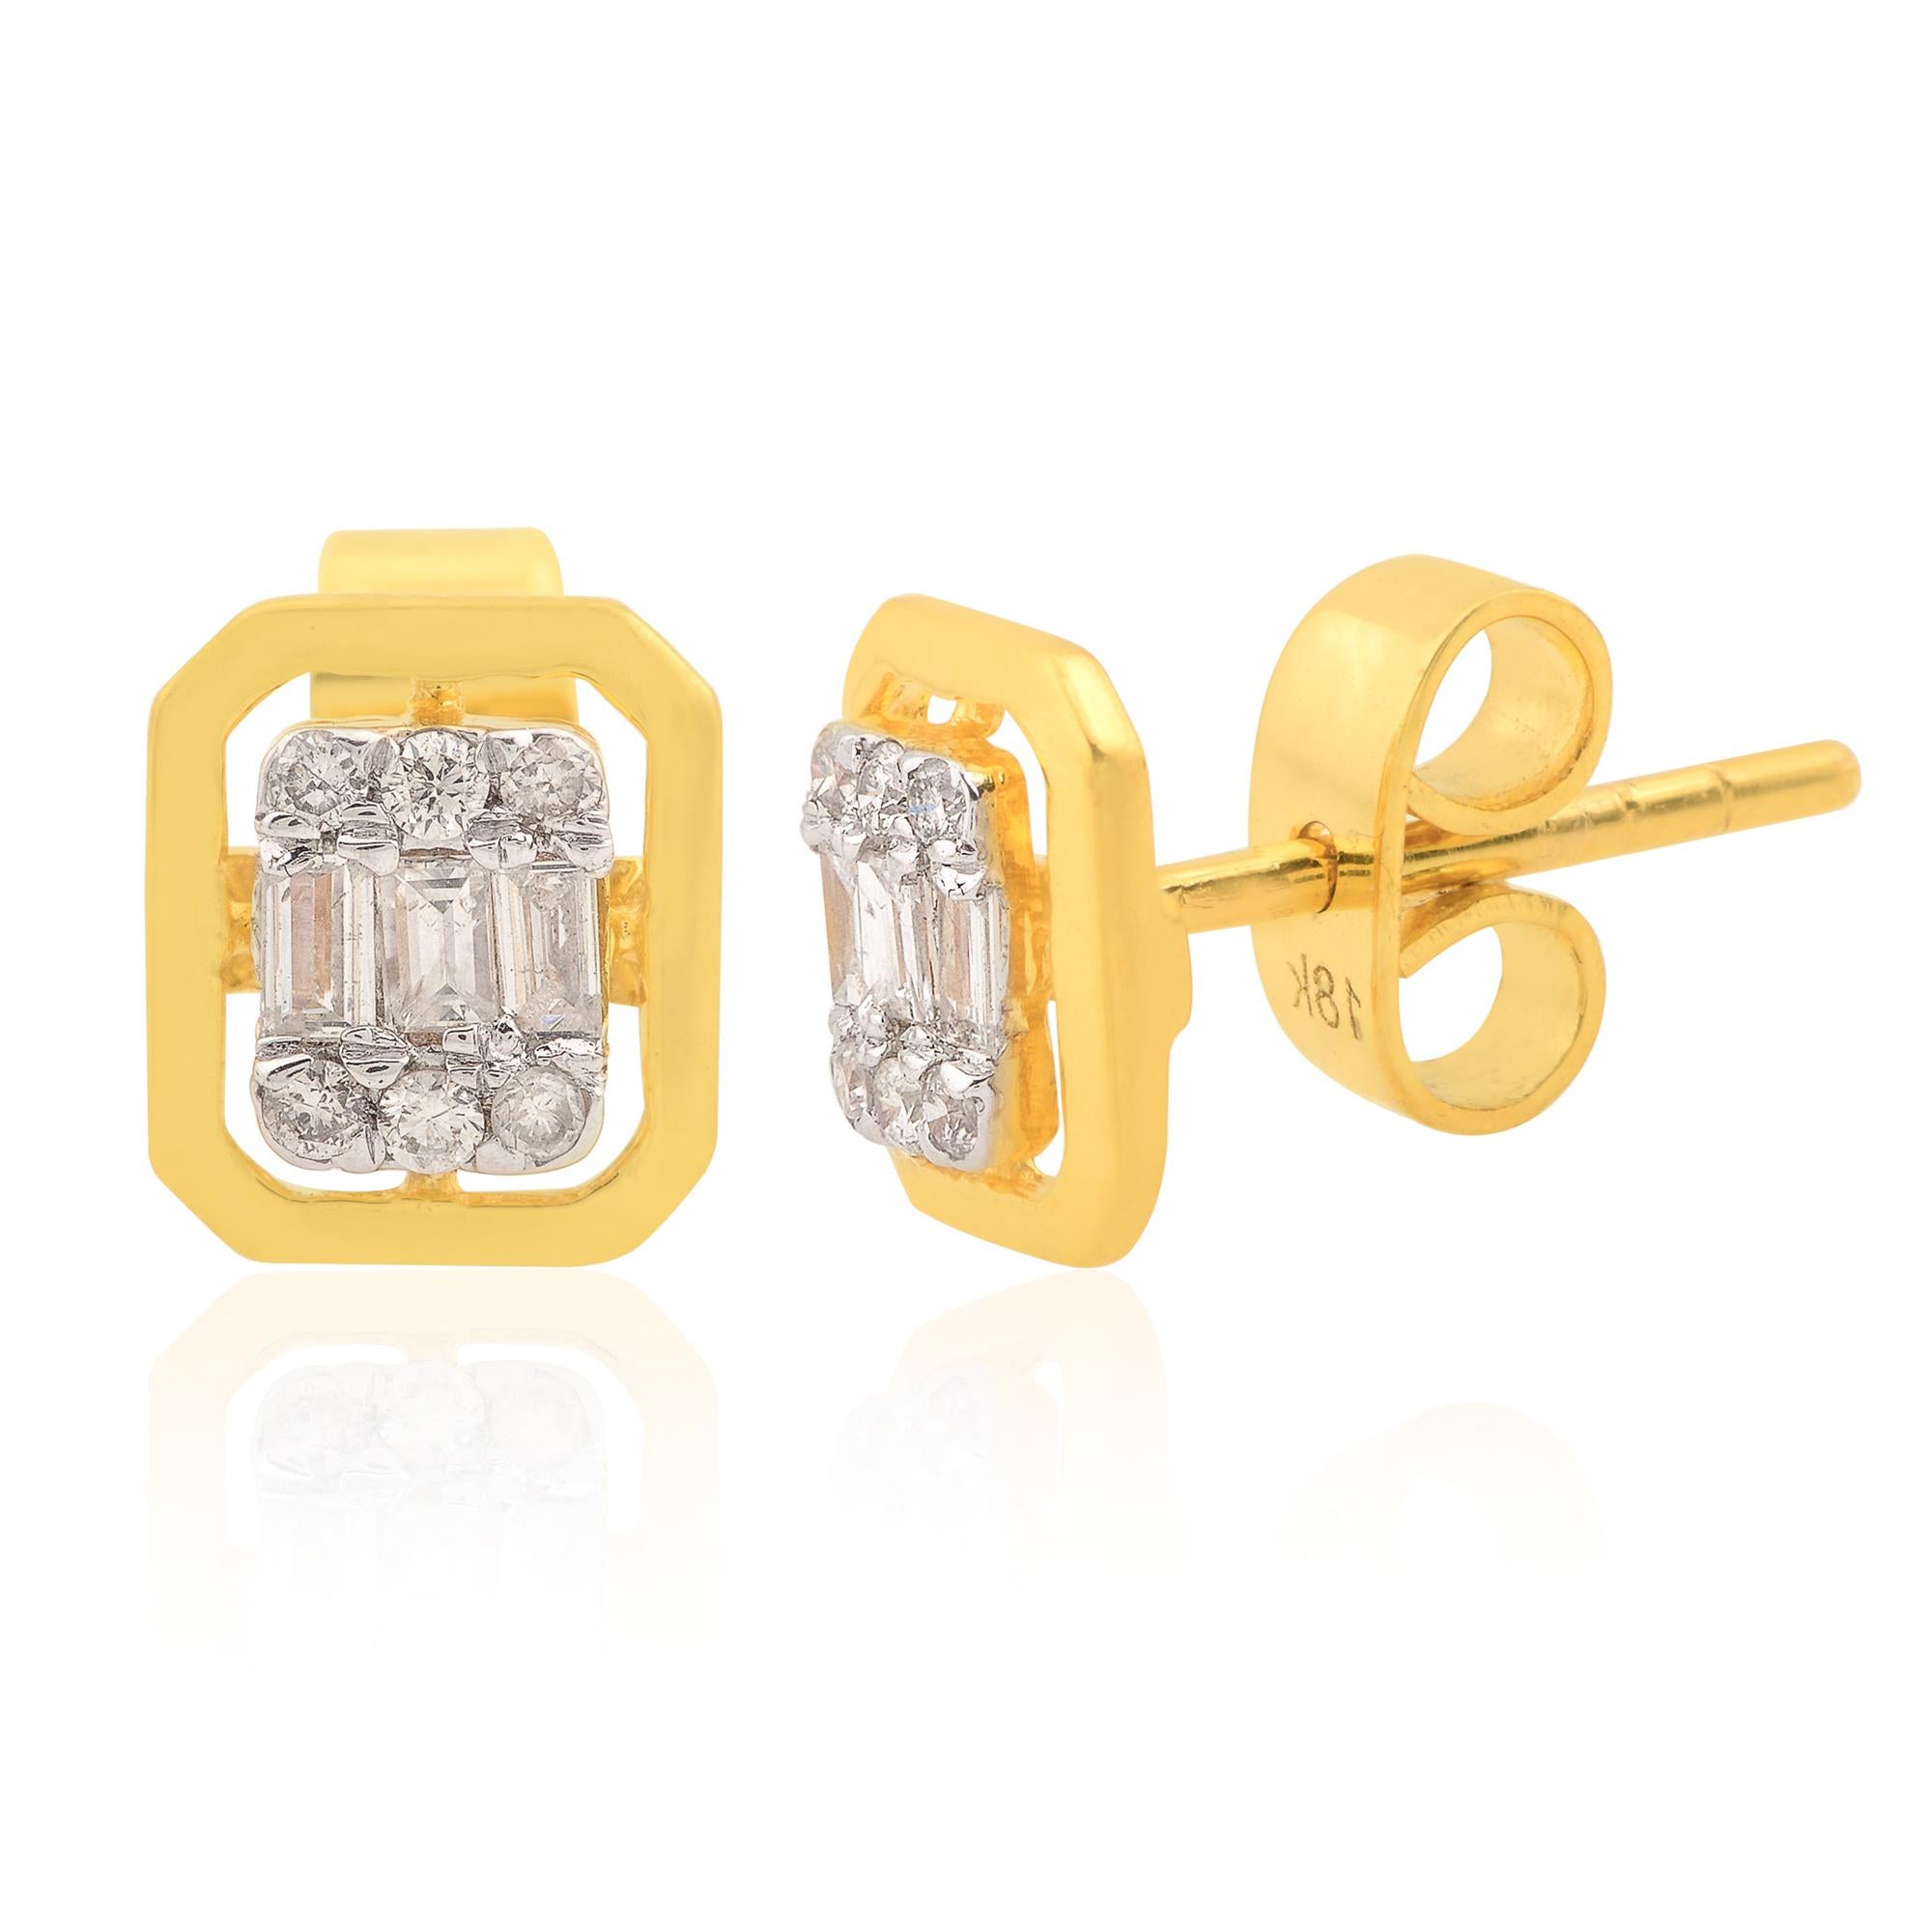 Item Code :- SEE-1376A
Gross Weight :- 2.00 gm
18k Yellow Gold Weight :- 1.96 gm
Diamond Weight :- 0.21 carat  ( AVERAGE DIAMOND CLARITY SI1-SI2 & COLOR H-I )
Earrings Length :- 7 mm approx.
✦ Sizing
.....................
We can adjust most items to